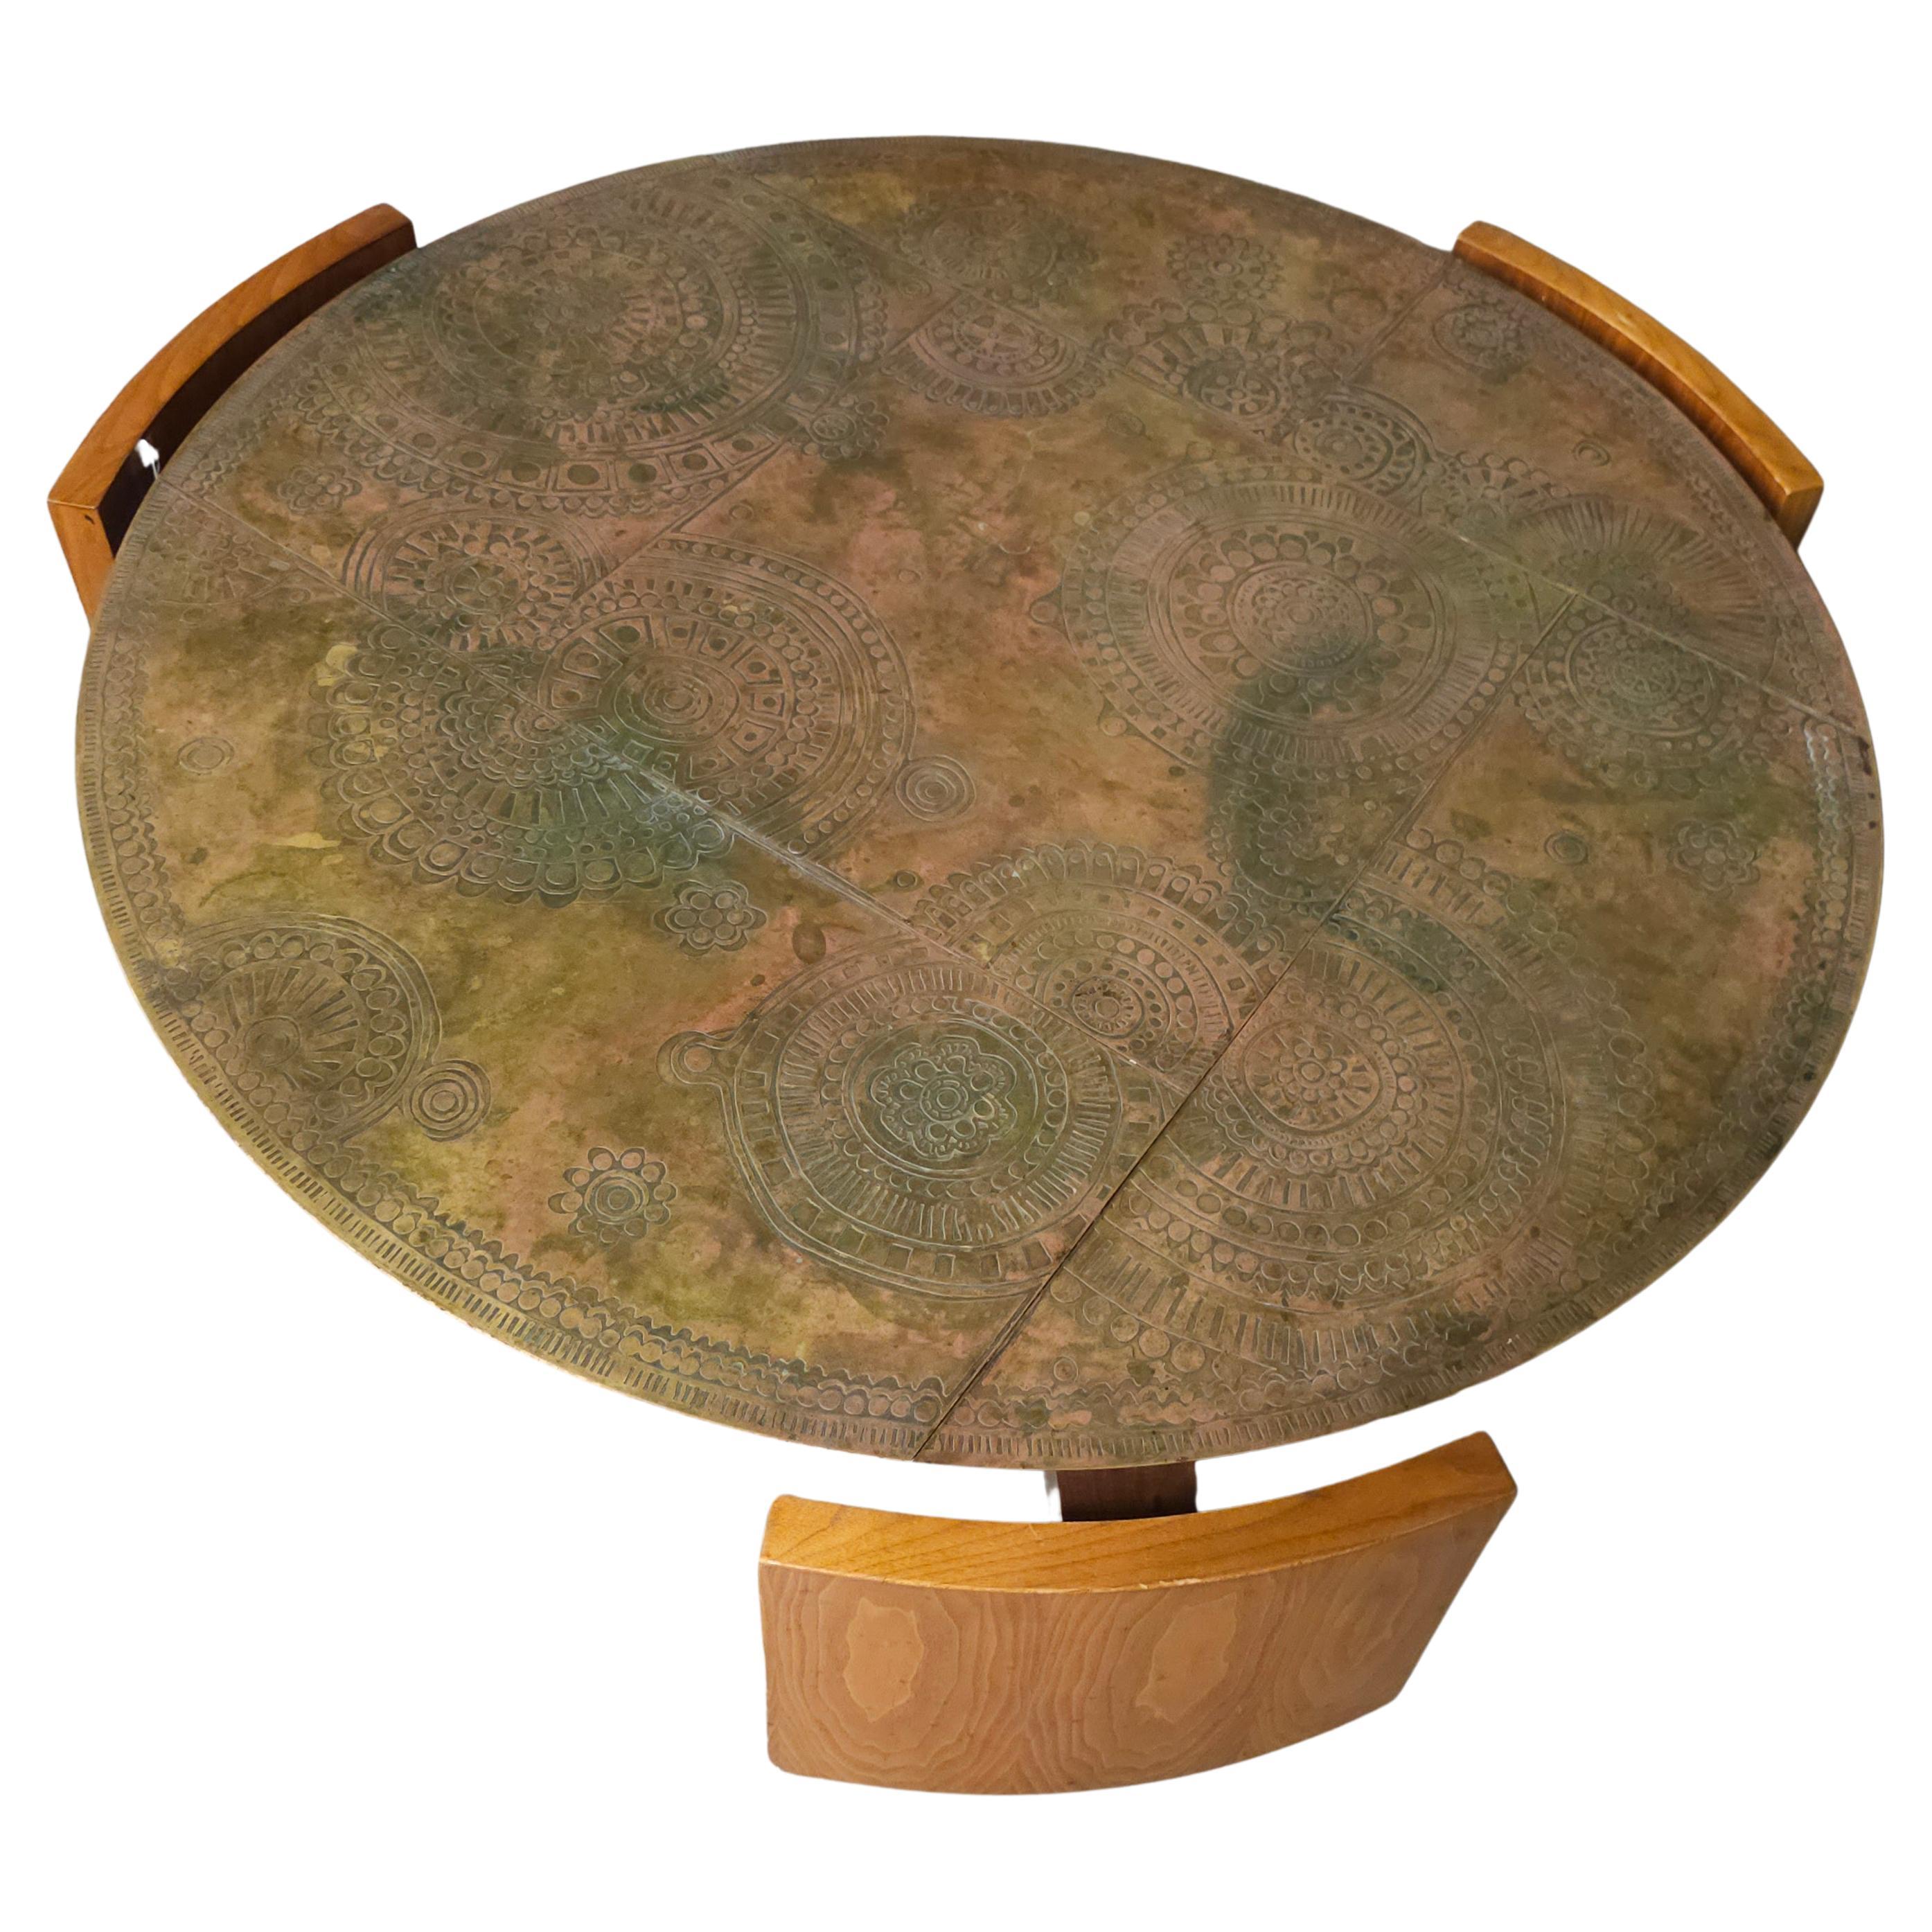 Embossed Vladimir Kagan (1927-2016) Patinated Etched Brass Top Teak Coffee Table, 1950s For Sale